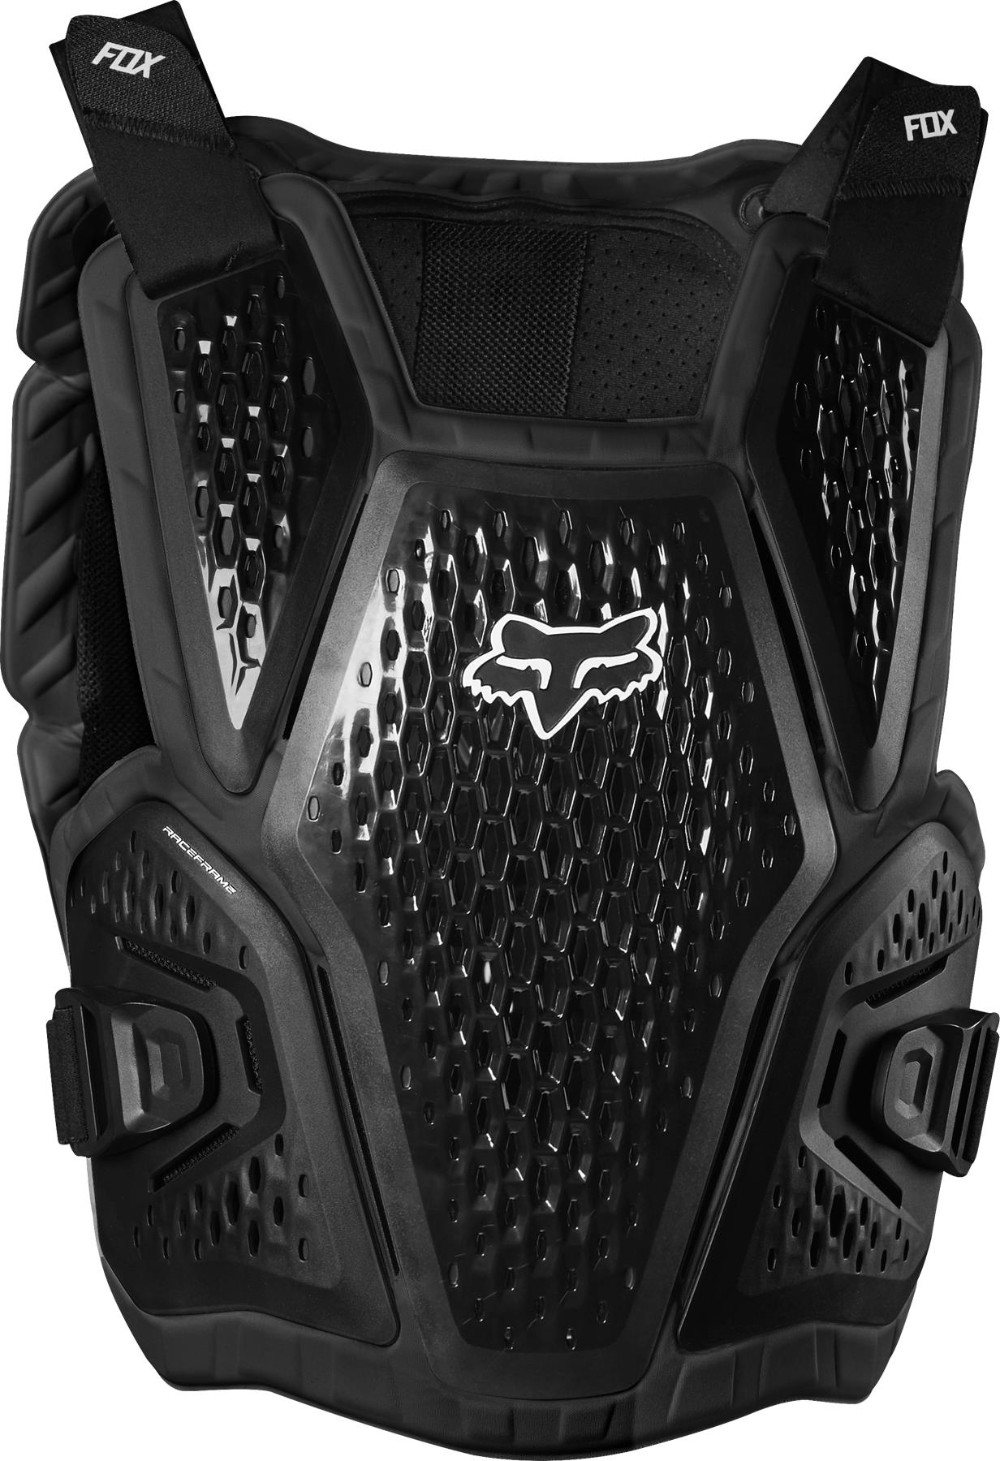 Raceframe Impact MTB Chest Guard image 0